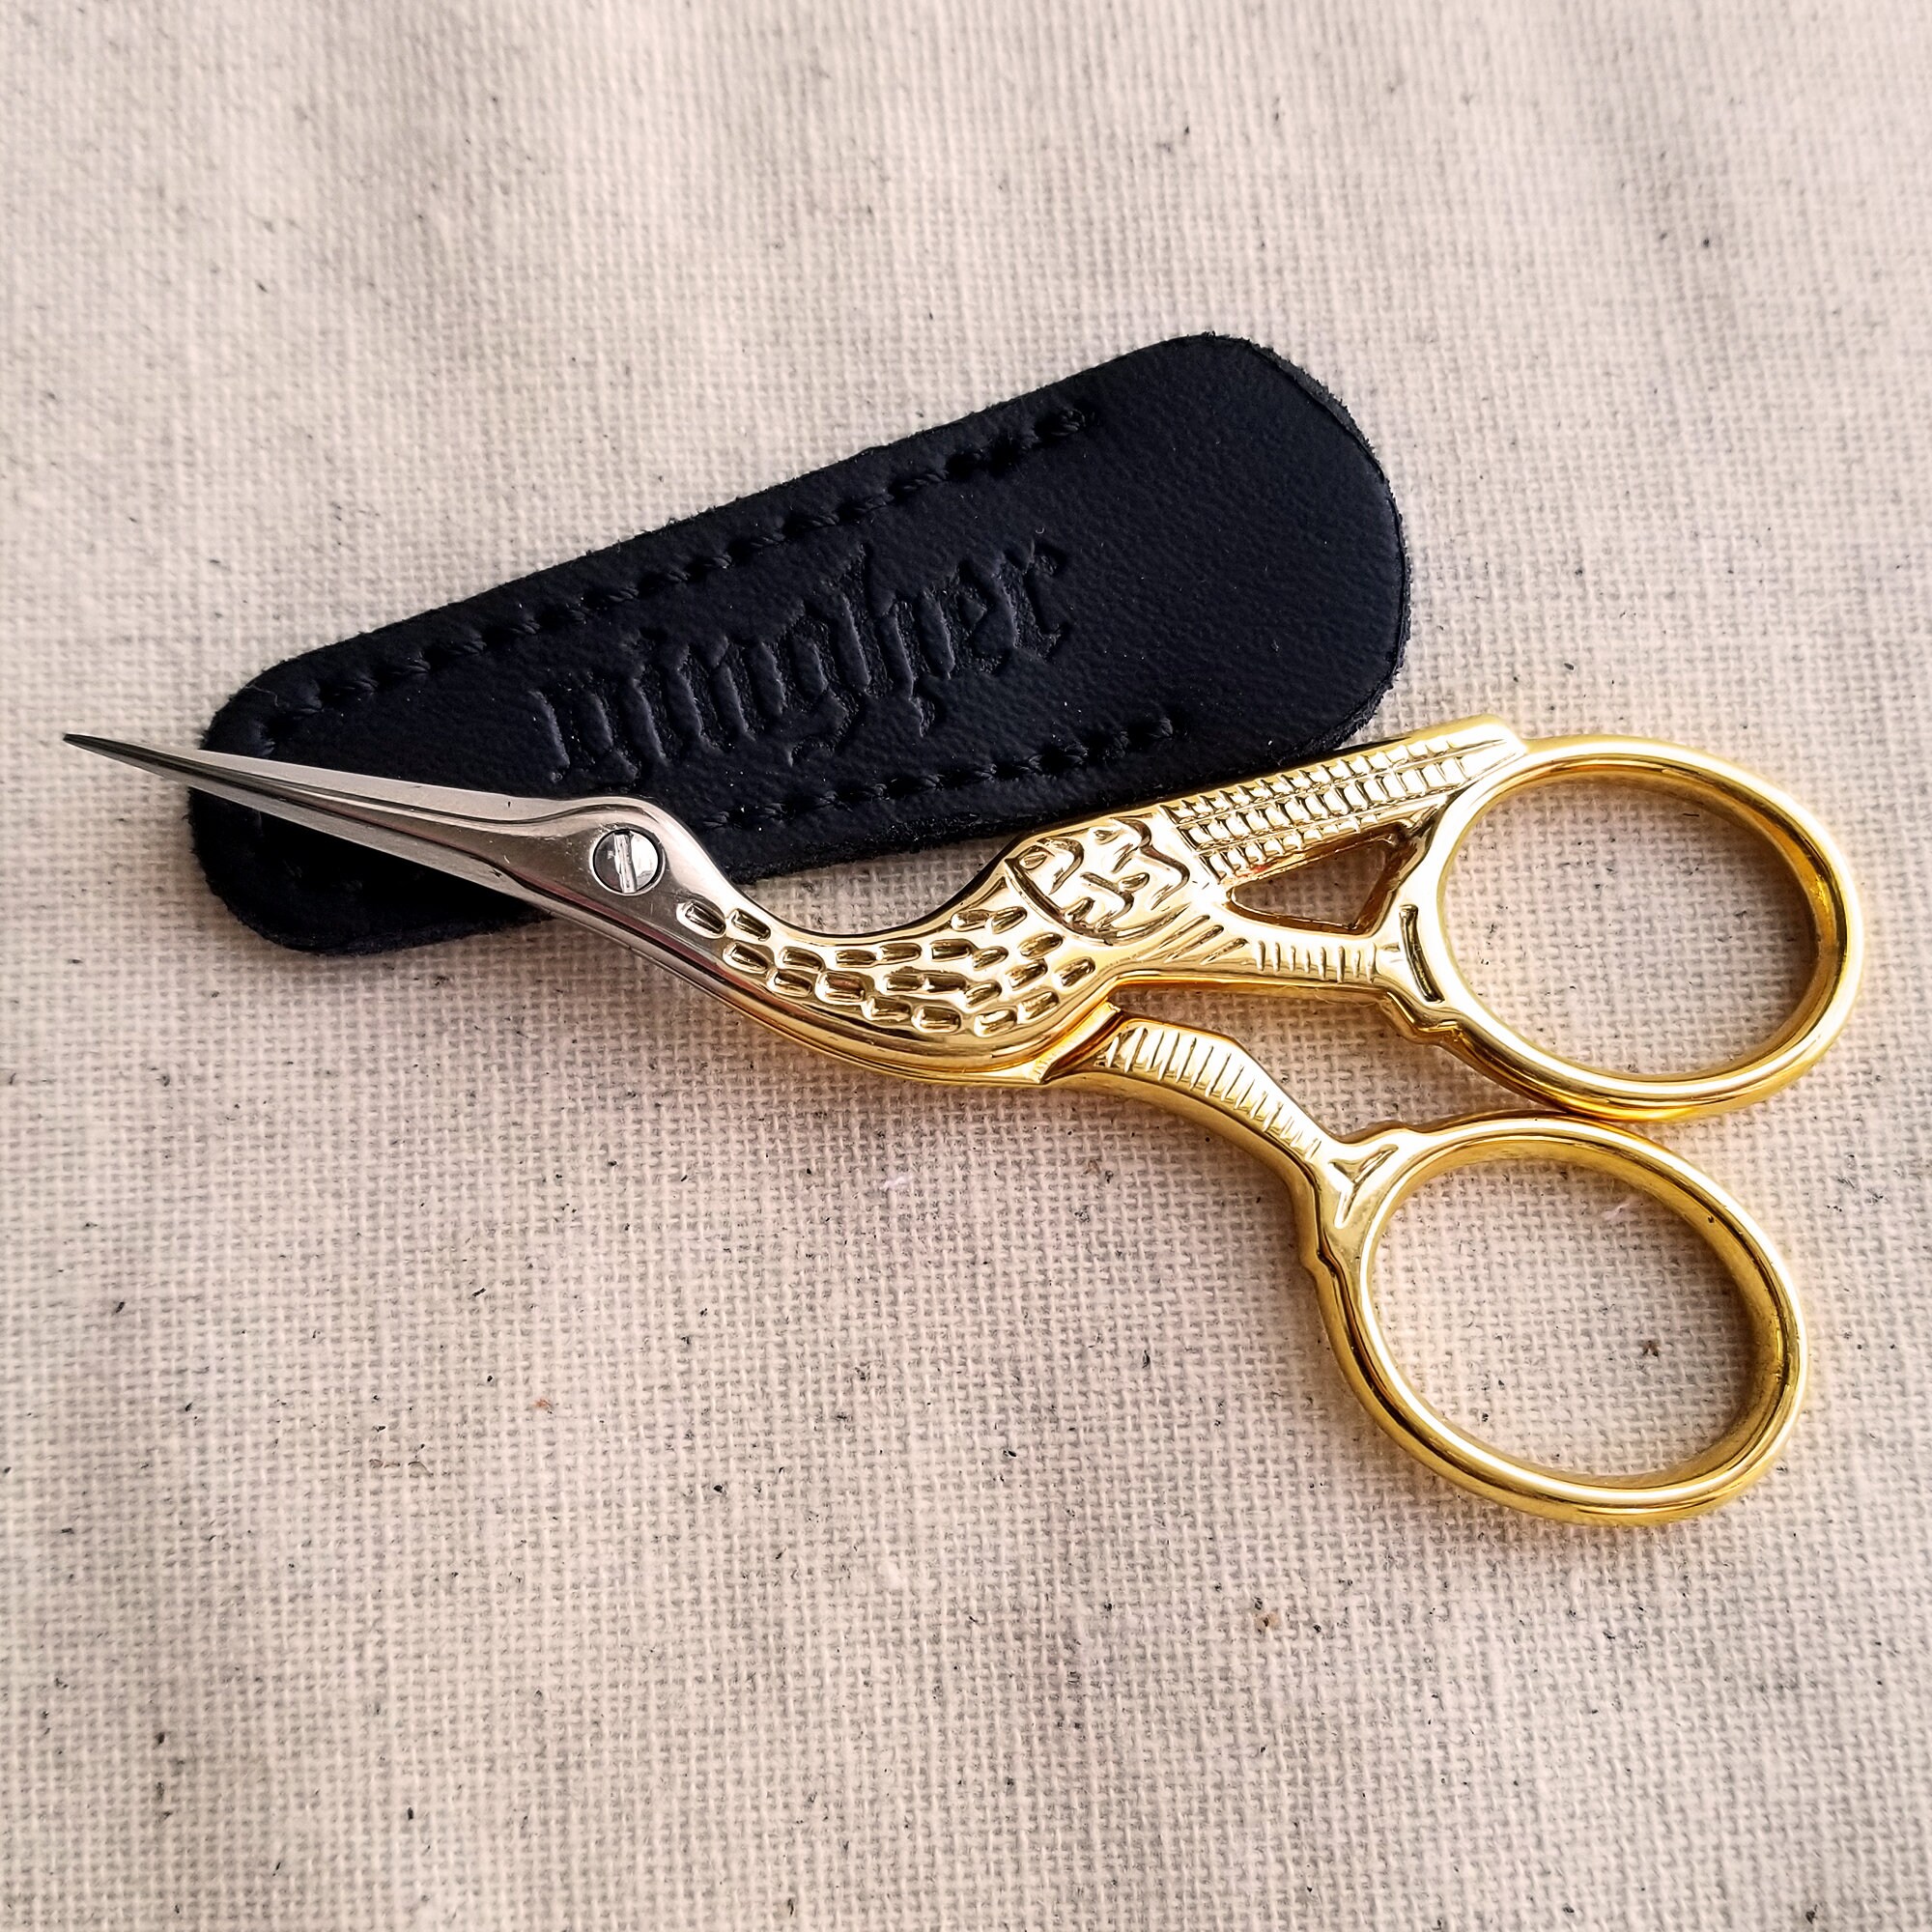  Gingher Stork Embroidery Scissors and Leather Sheath - 3.5  Craft Scissors for Fabric, Thread, and Needlework Yarn Cutting - Gold :  Everything Else